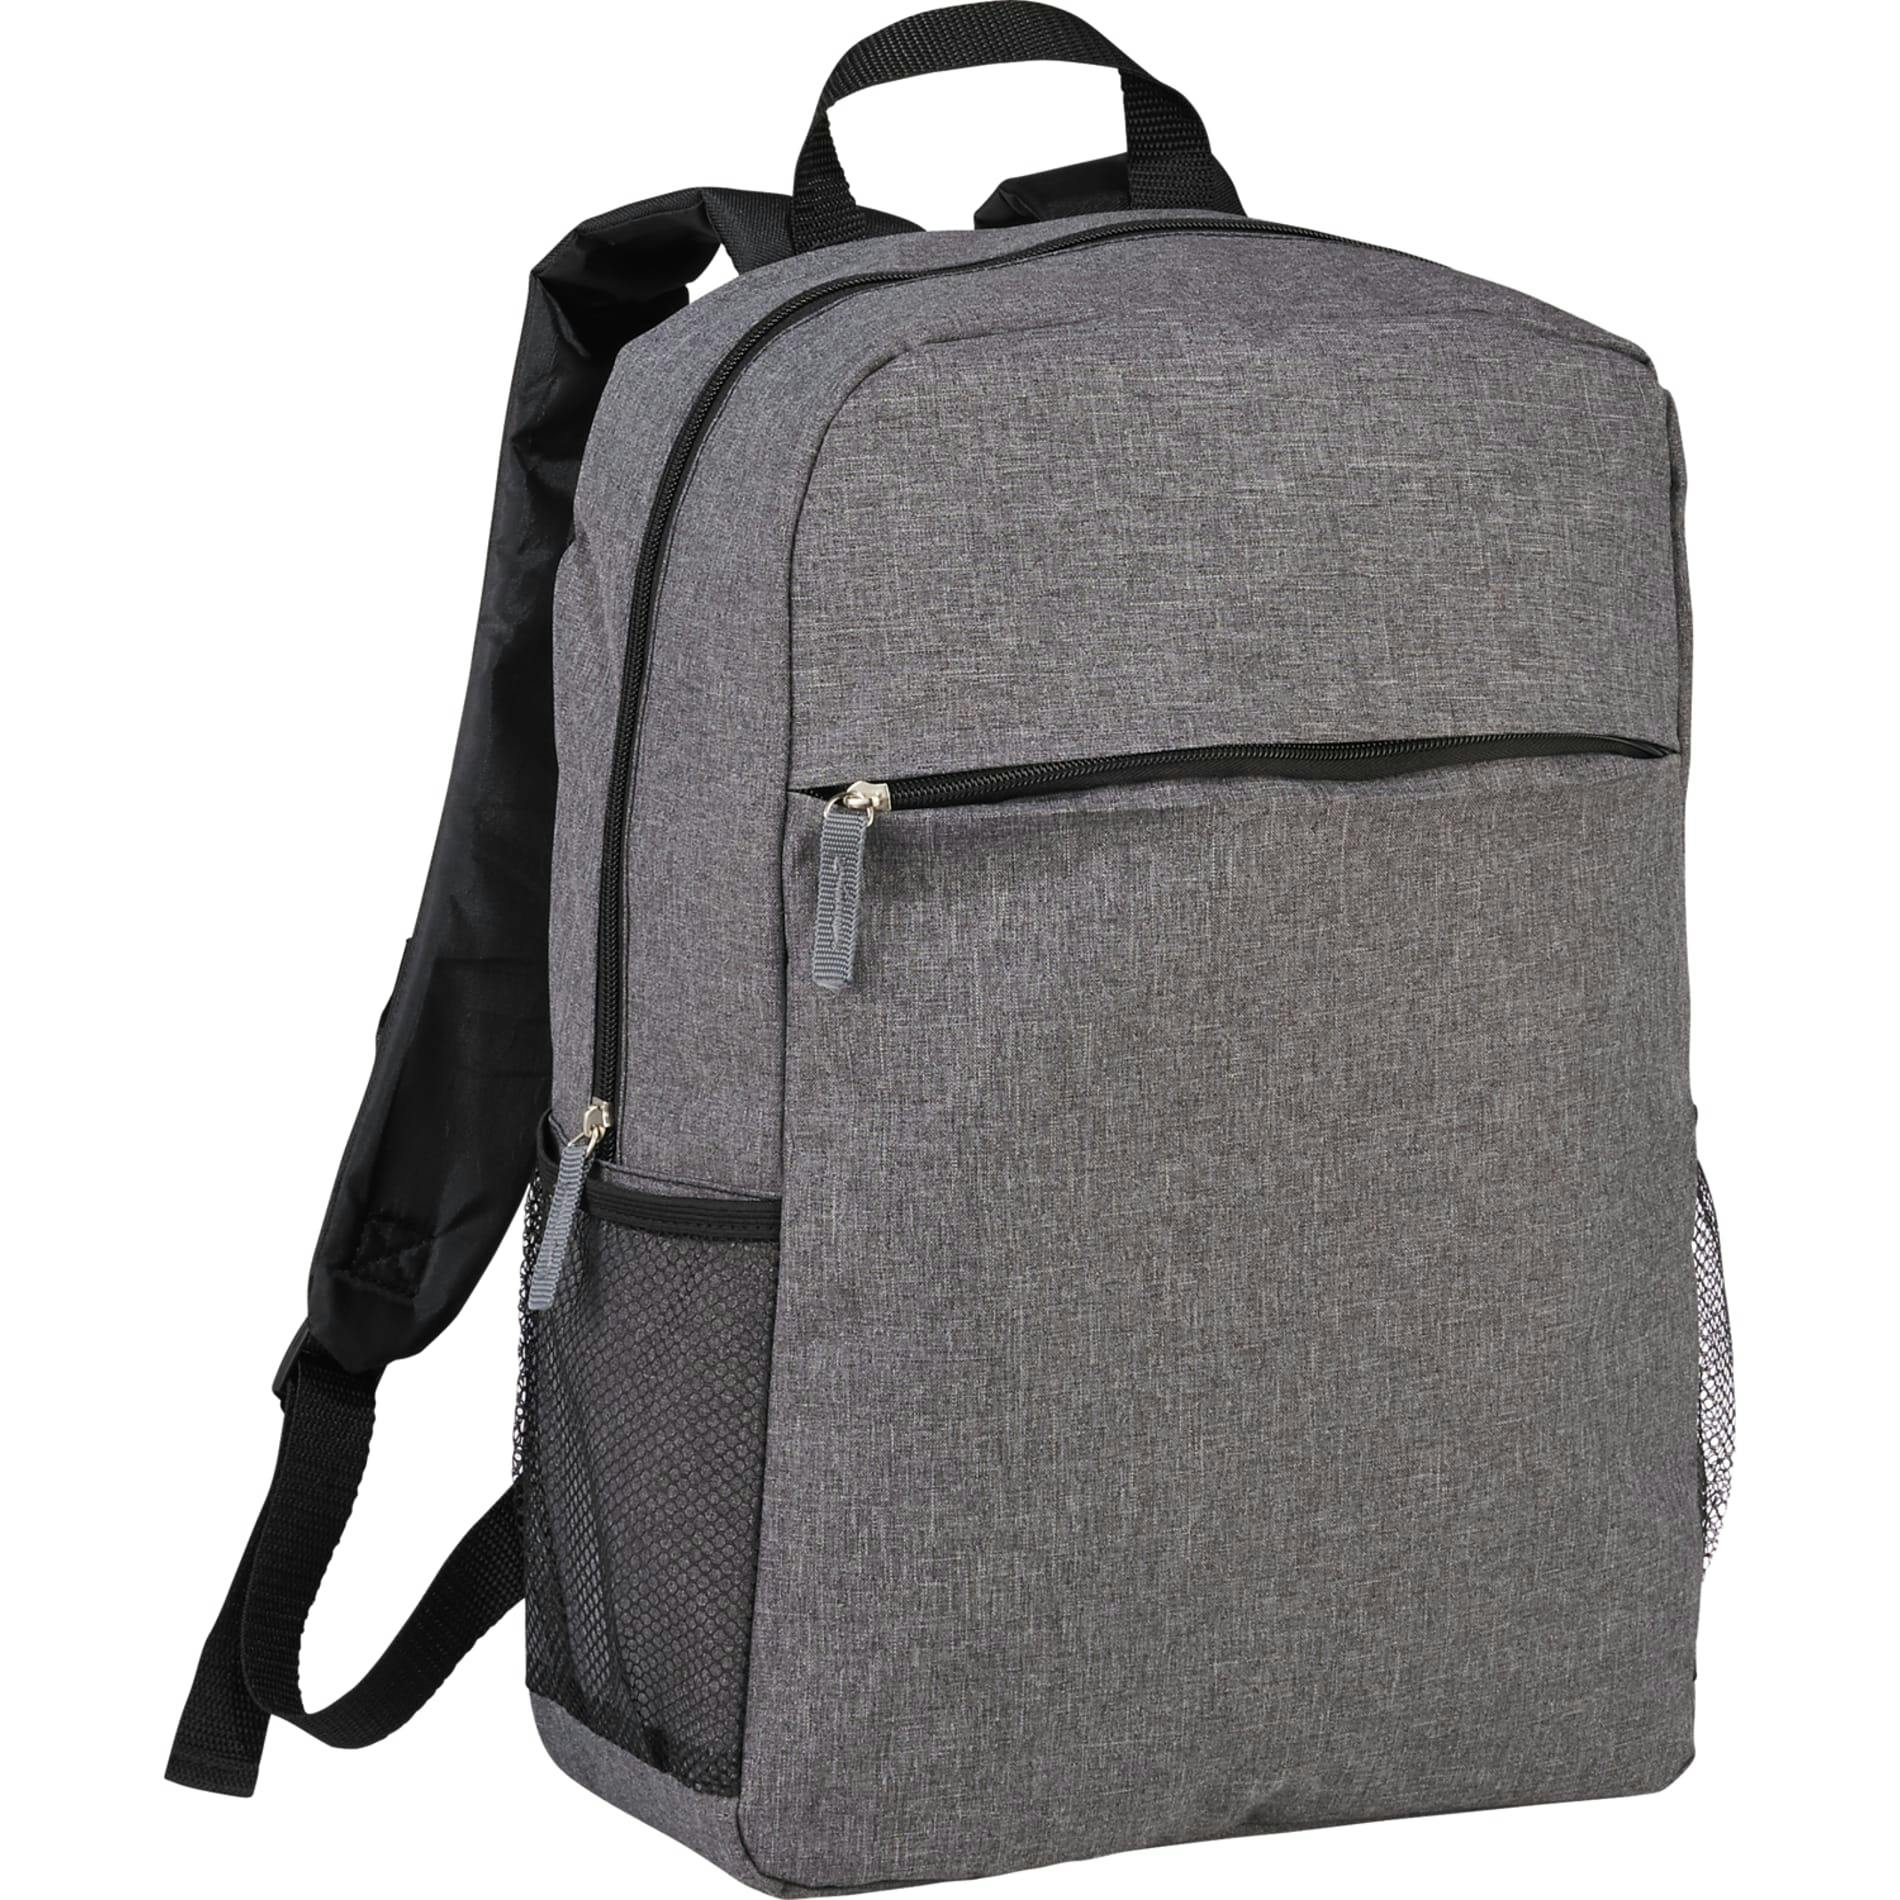 Urban 15" Computer Backpack - additional Image 1